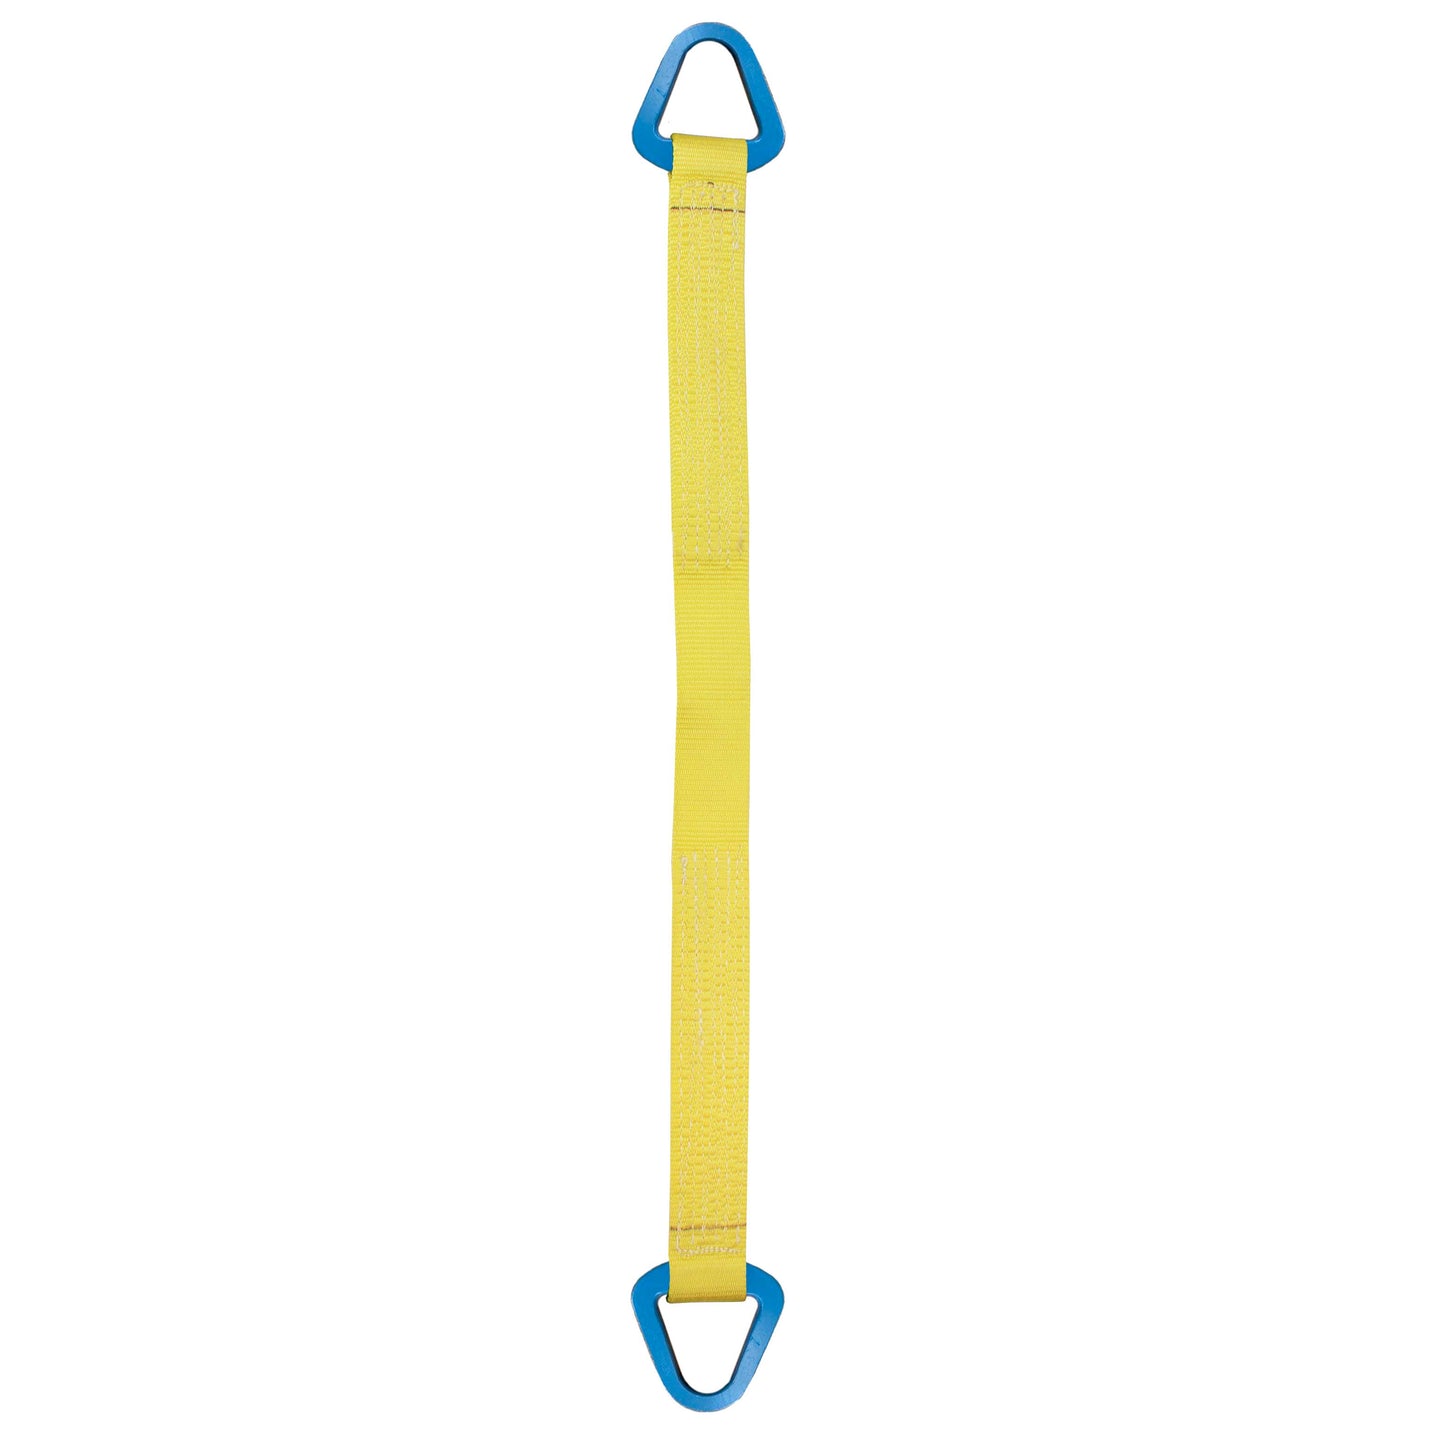 Nylon Lifting Sling Triangle 12 inch x 6 foot 1ply image 1 of 2